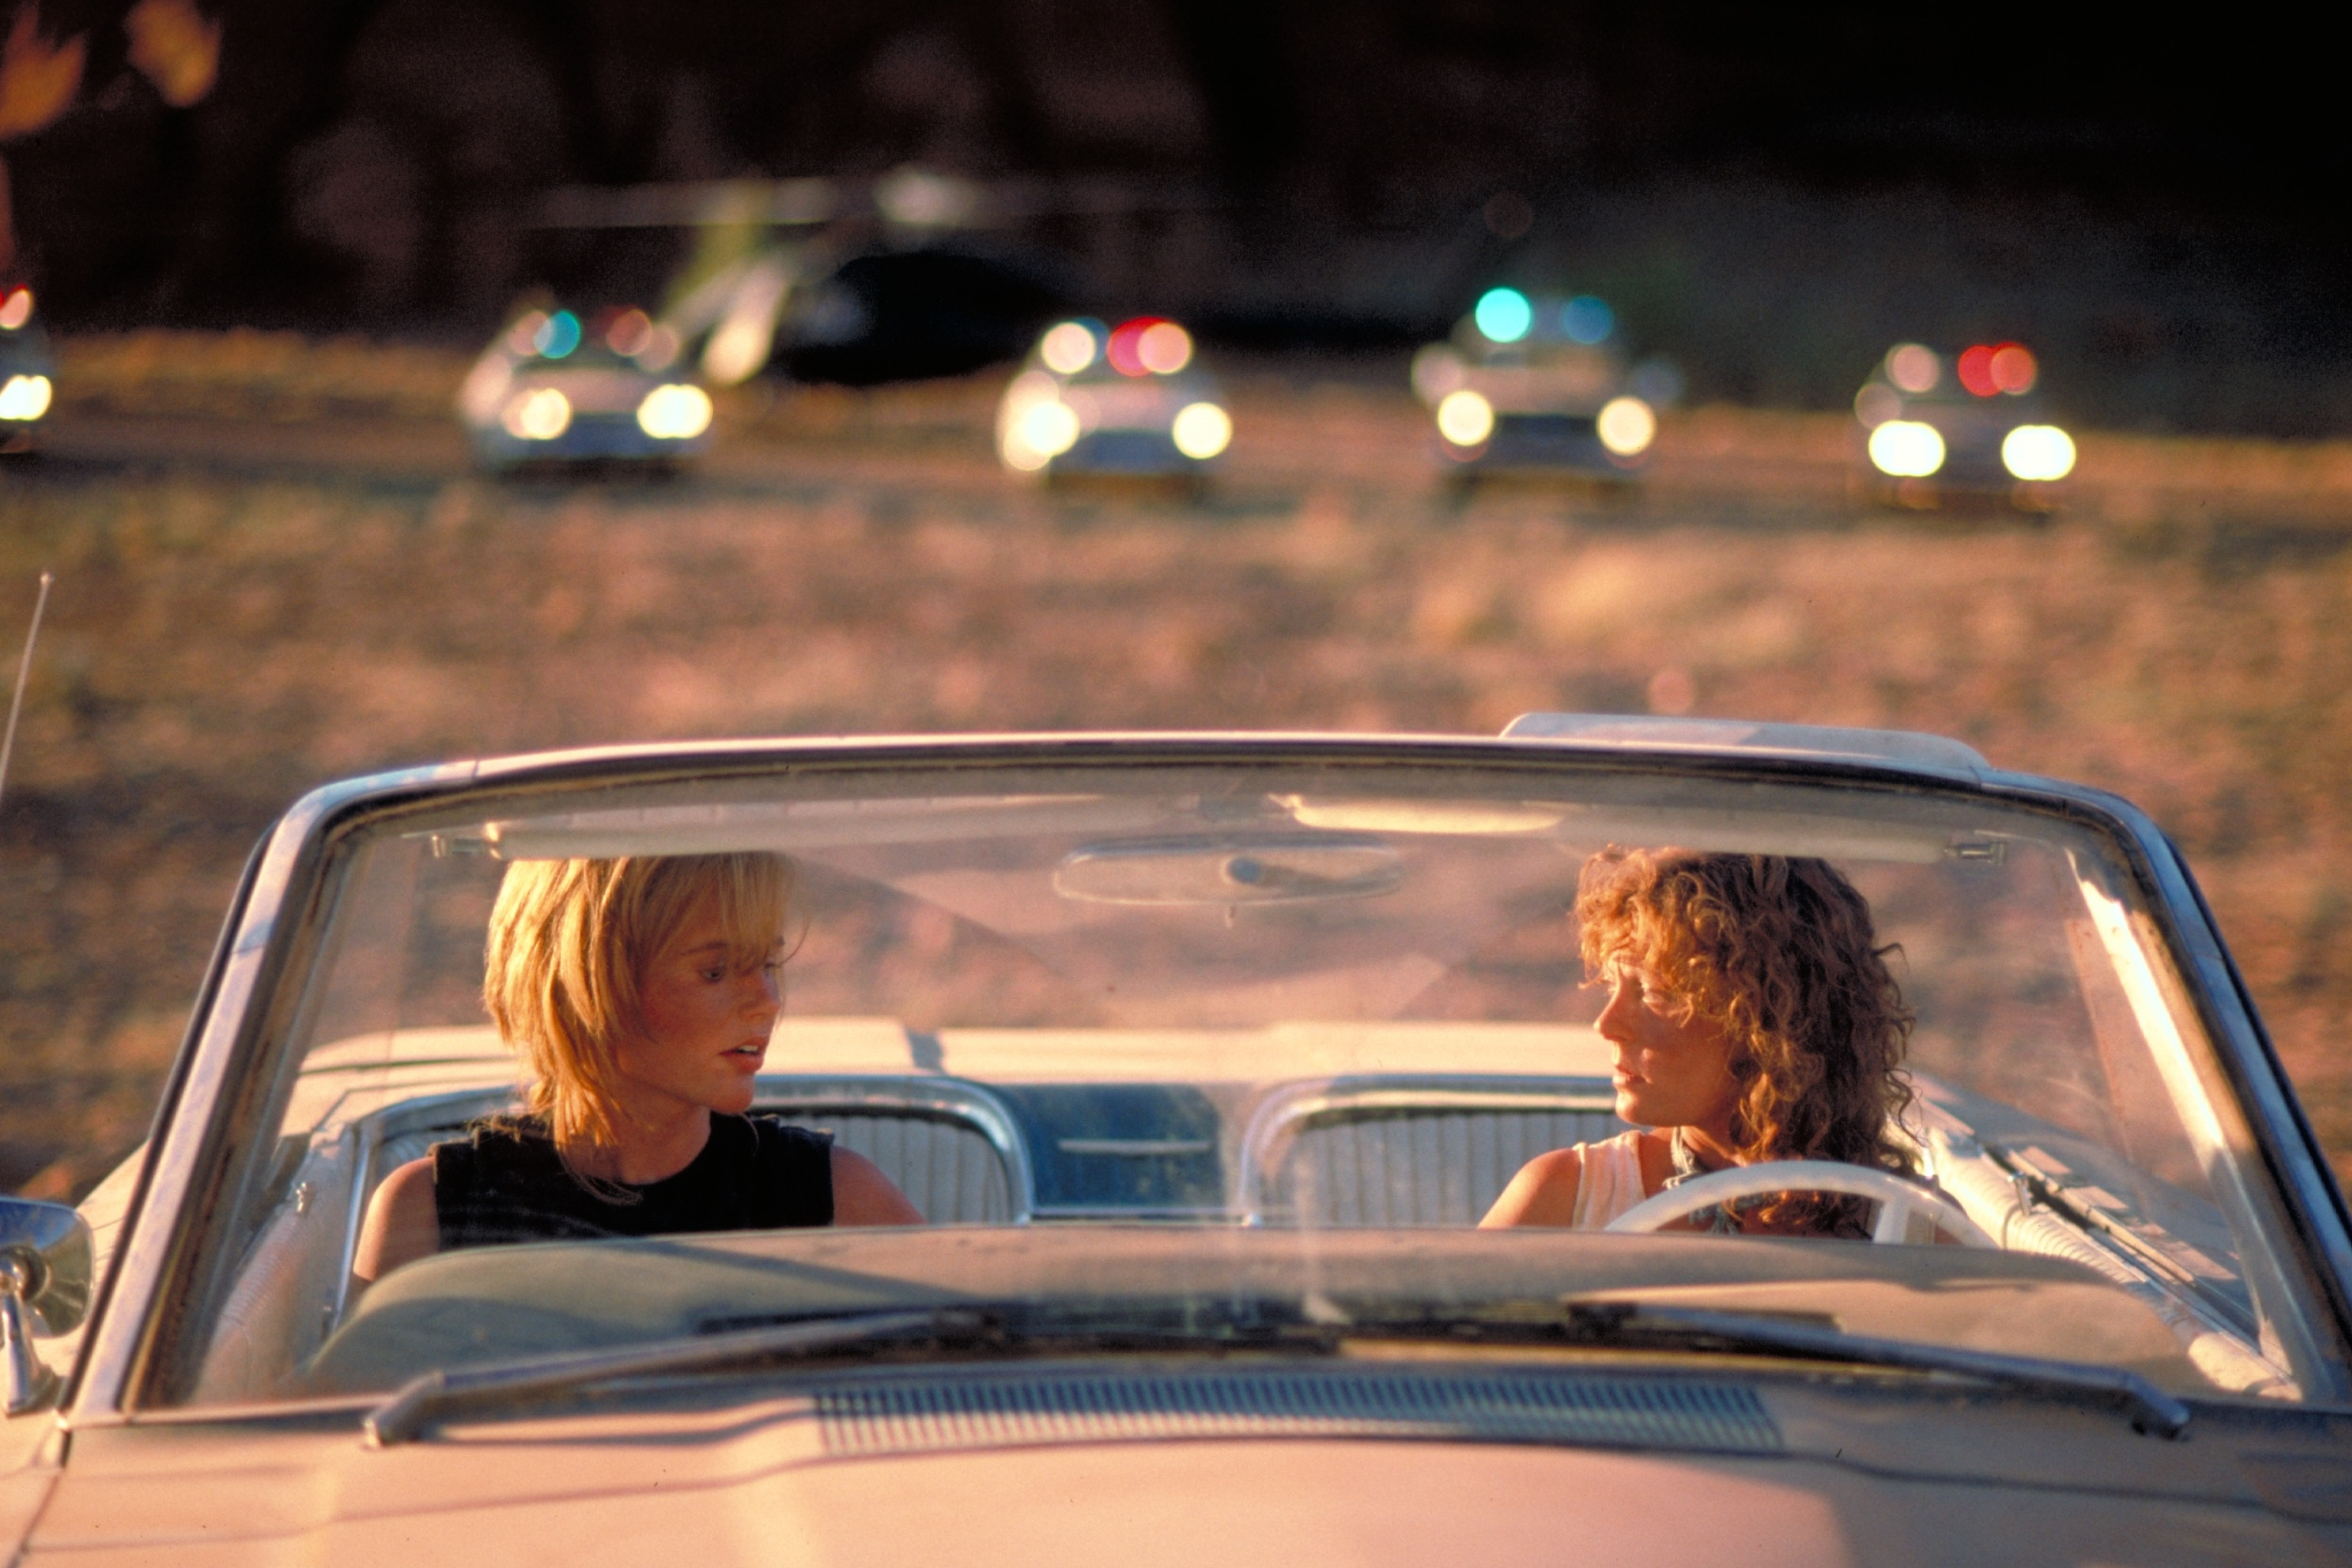 Thelma and Louise, Ending deleted scene, Mysterious fate, Untold story, 3080x2050 HD Desktop